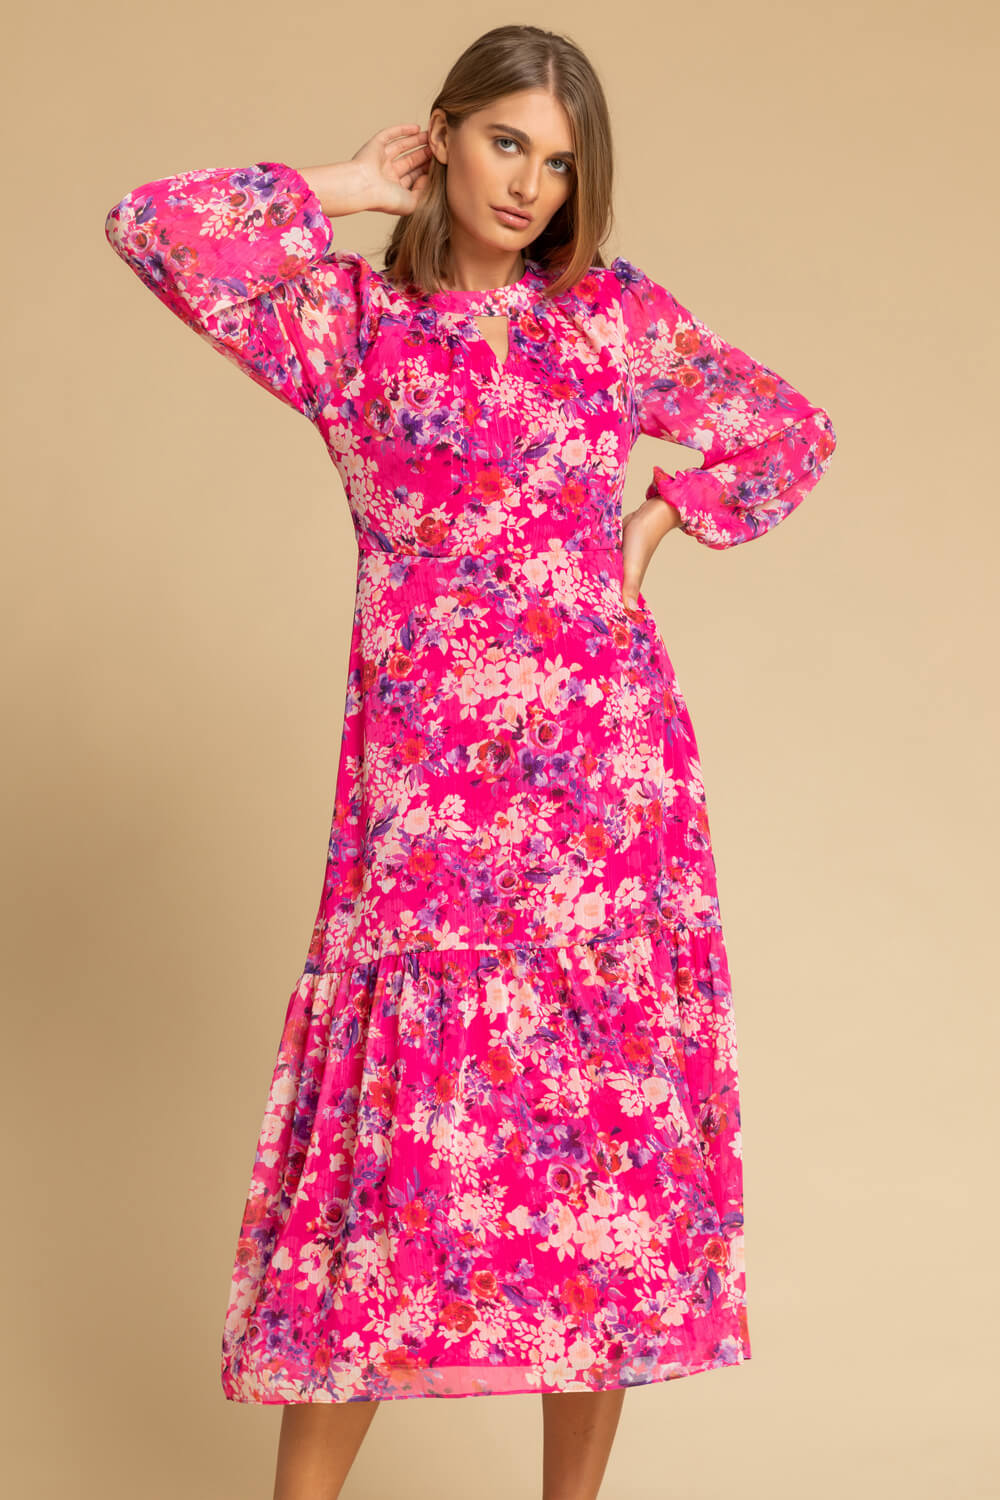 PINK Floral Print Tiered Keyhole Midi Dress, Image 4 of 5